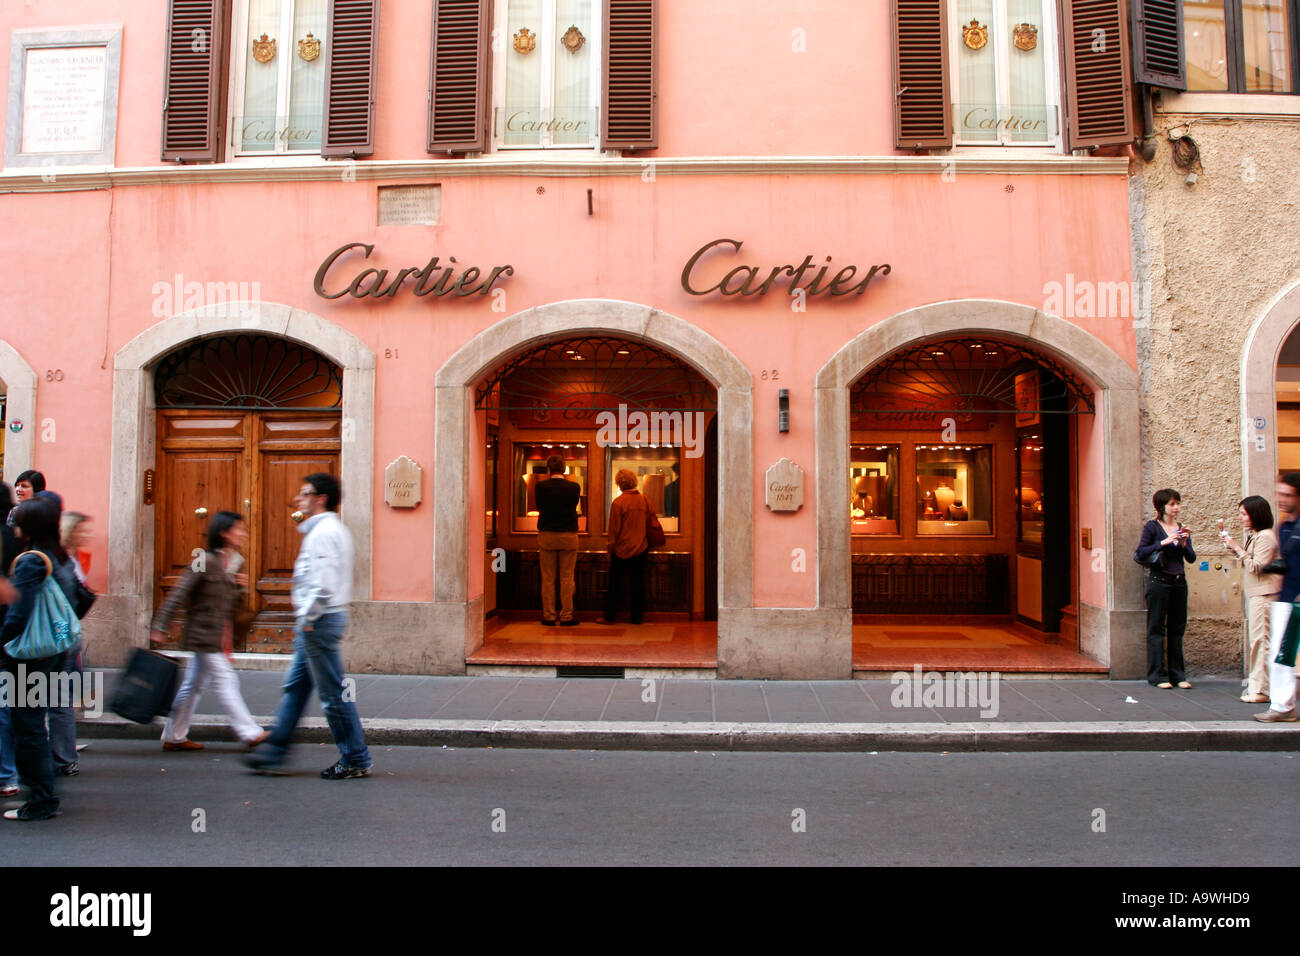 Cartier shop in Rome Italy Stock Photo 